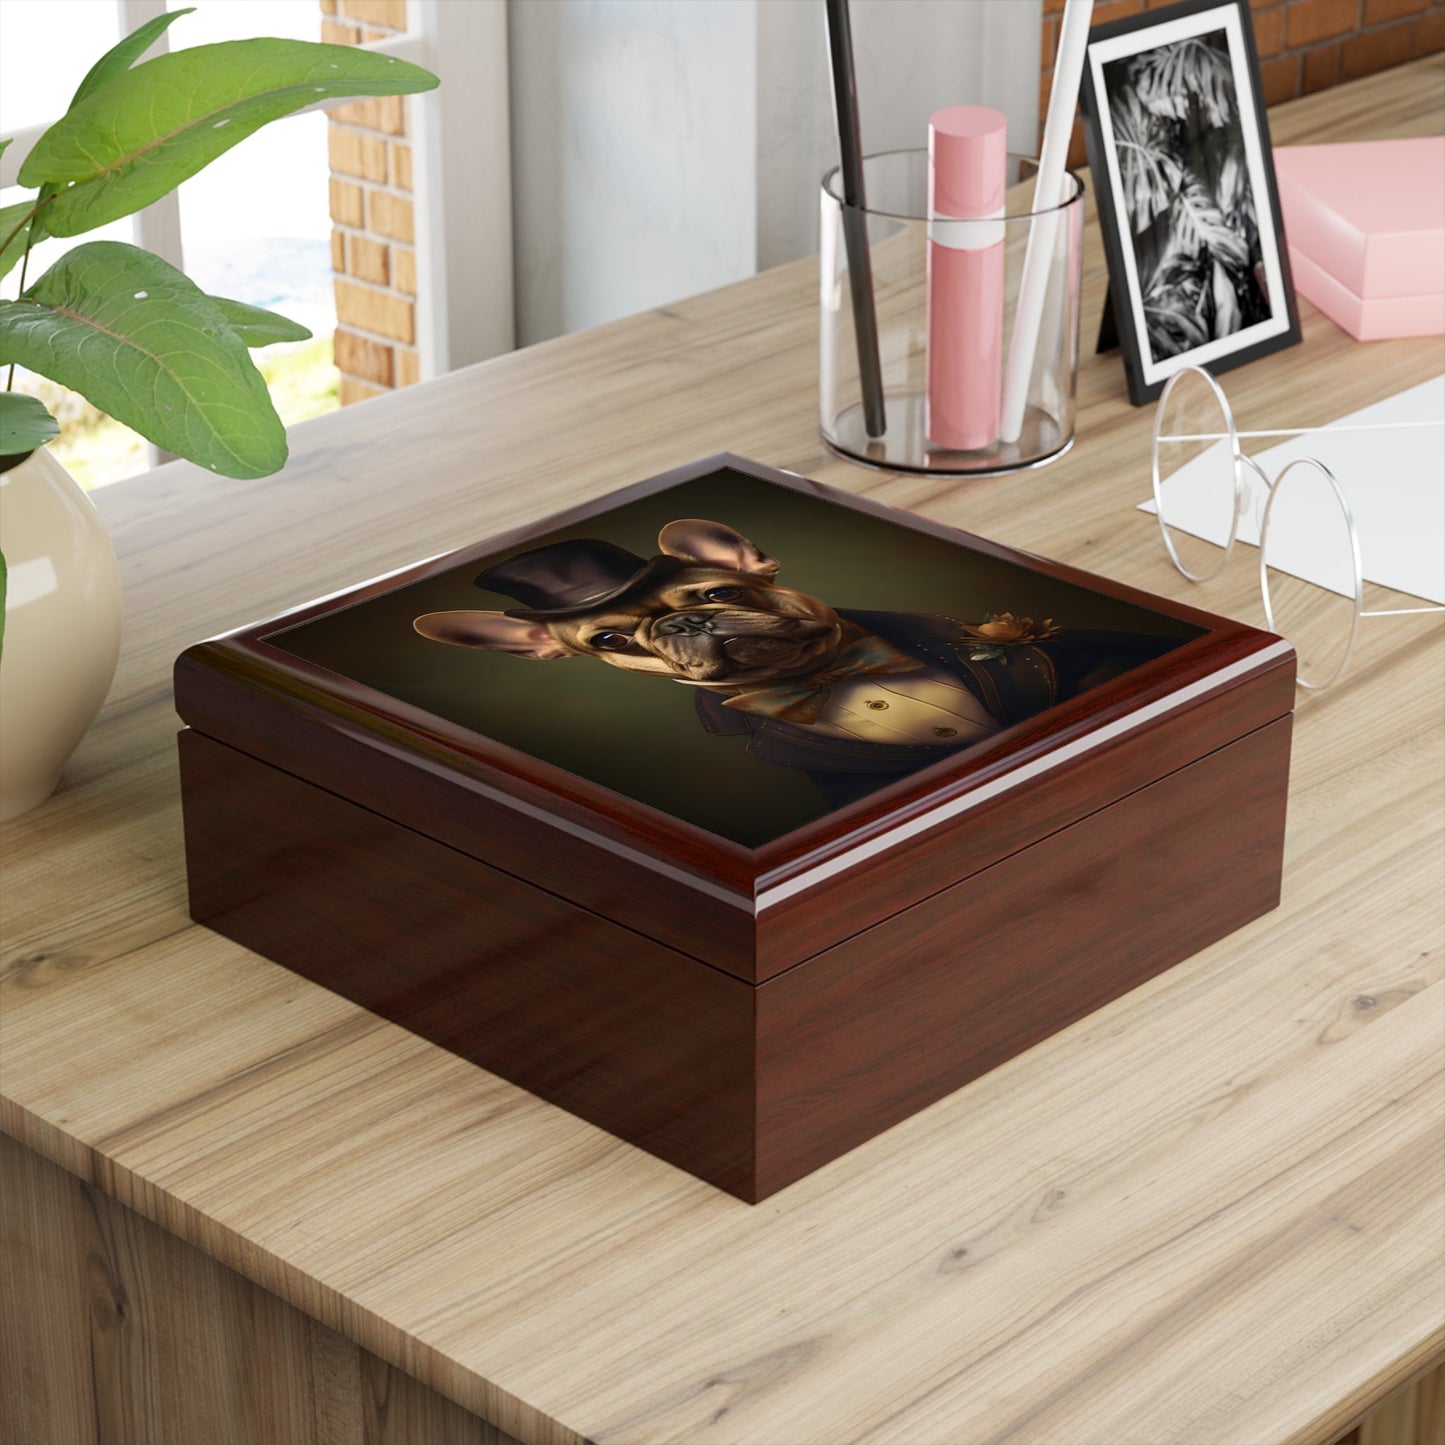 French Bulldog Wearing a Top Hat Art Print Gift and Jewelry Box